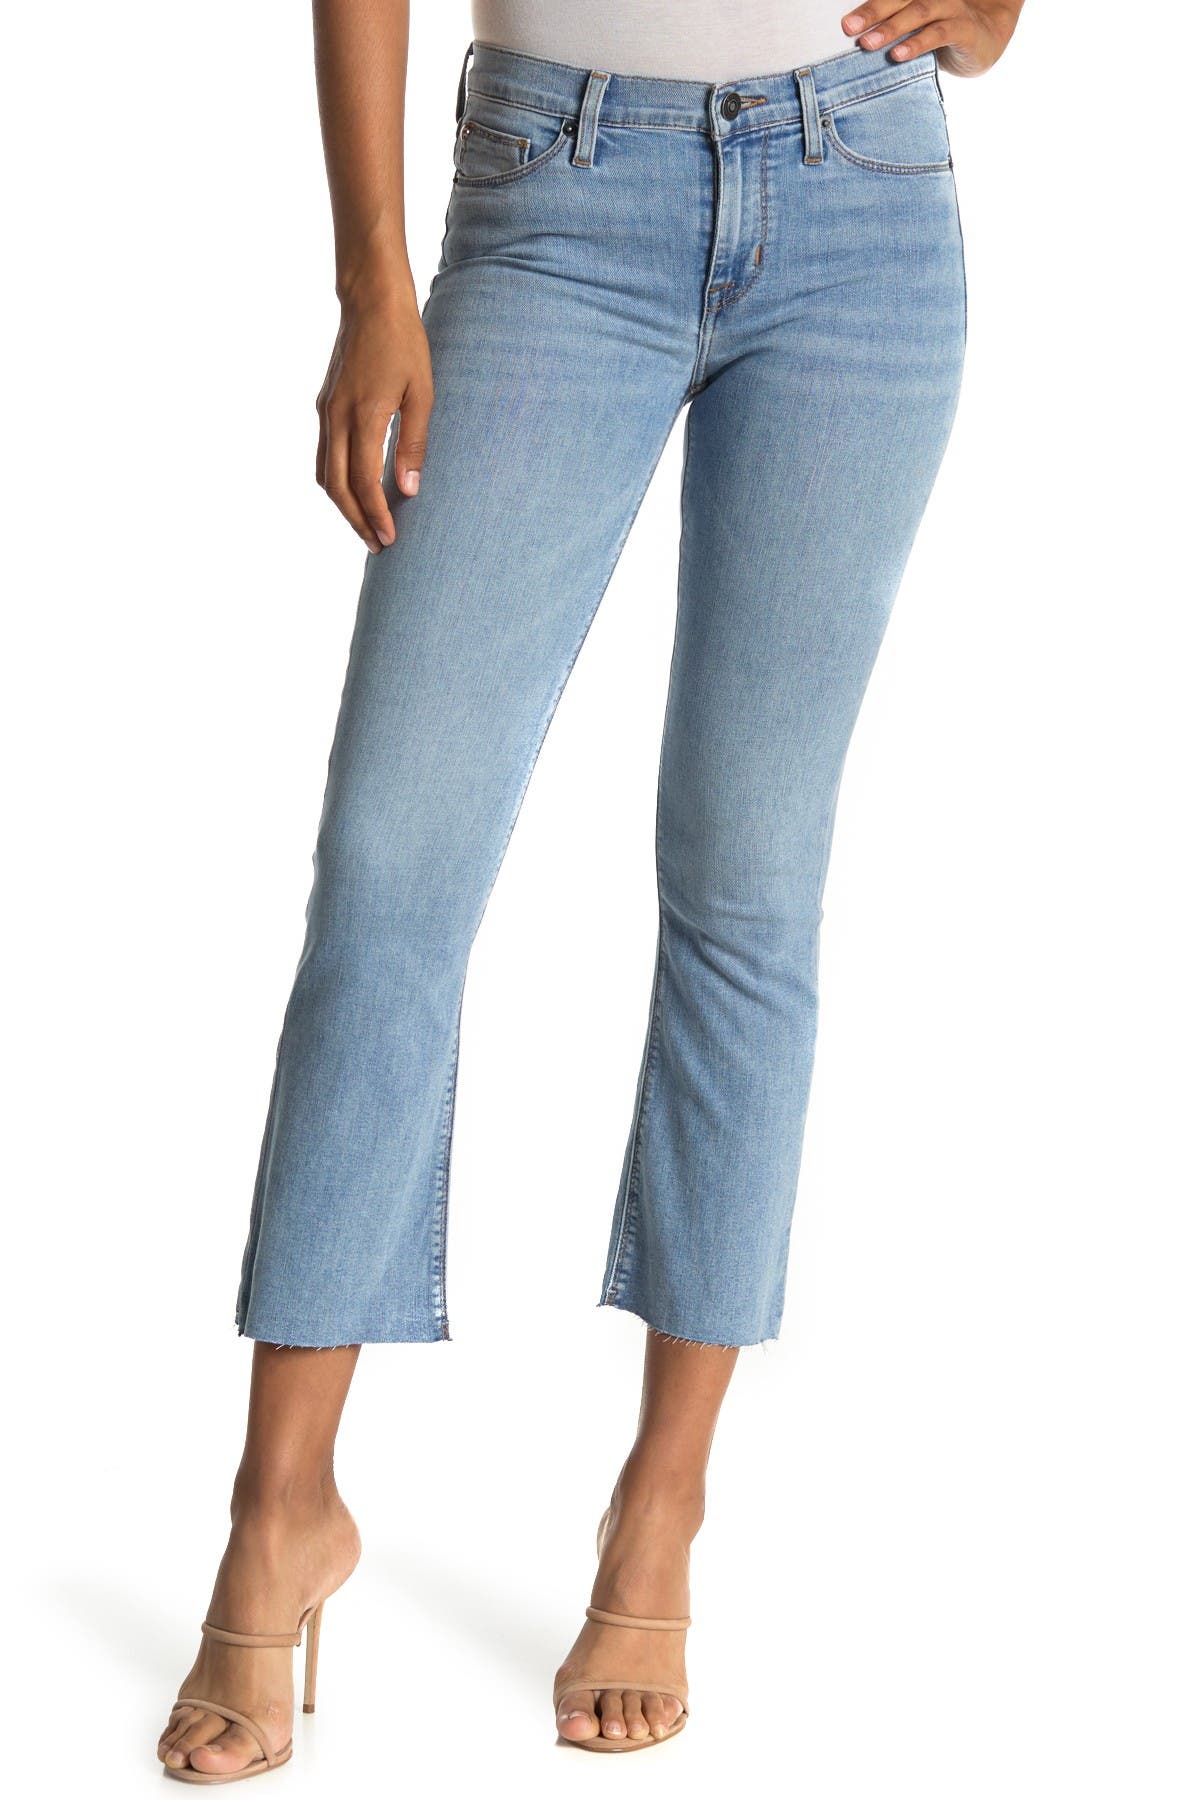 bootcut jeans cropped